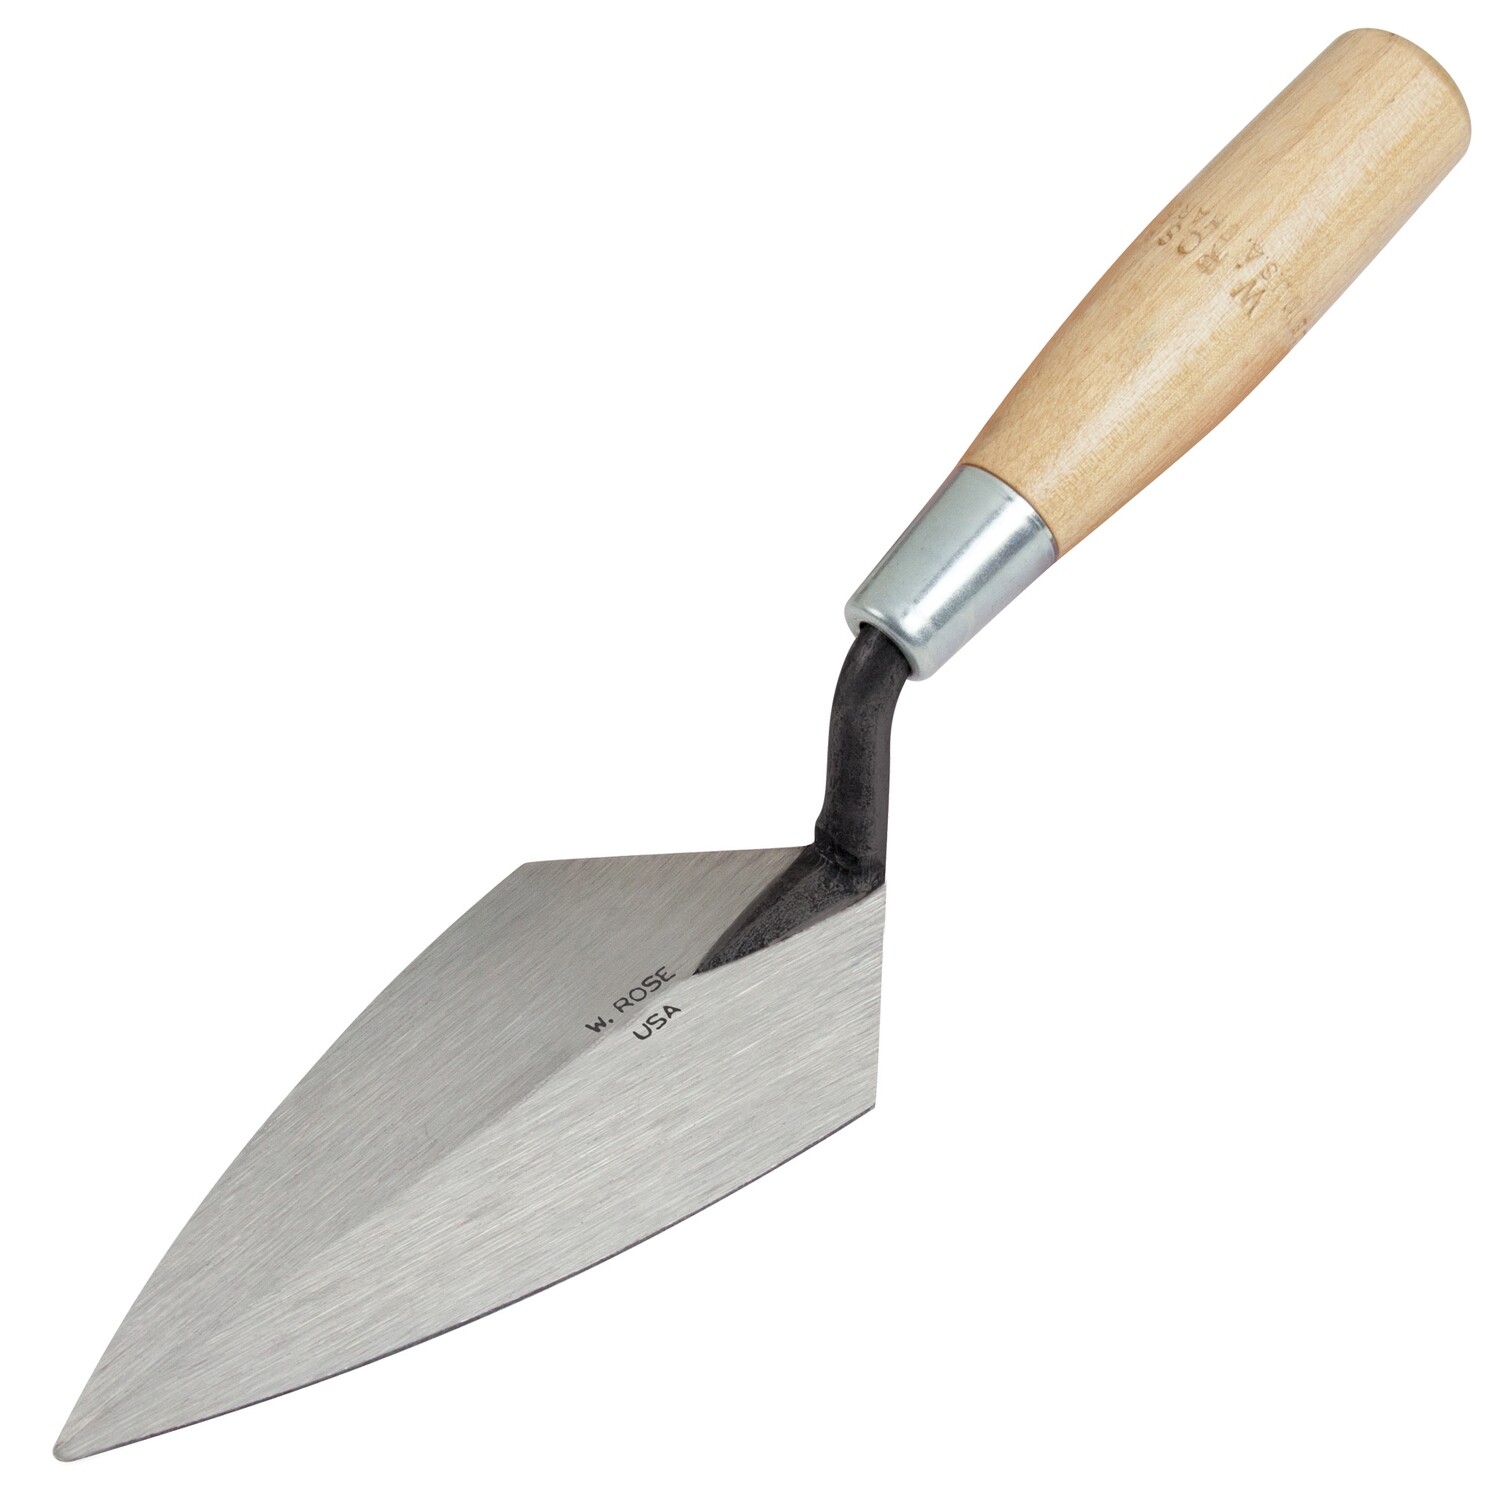 Kraft RO50-6 W.Rose 6"x2-3-4" Pointing Trowel with Wood Handle Pack of 6